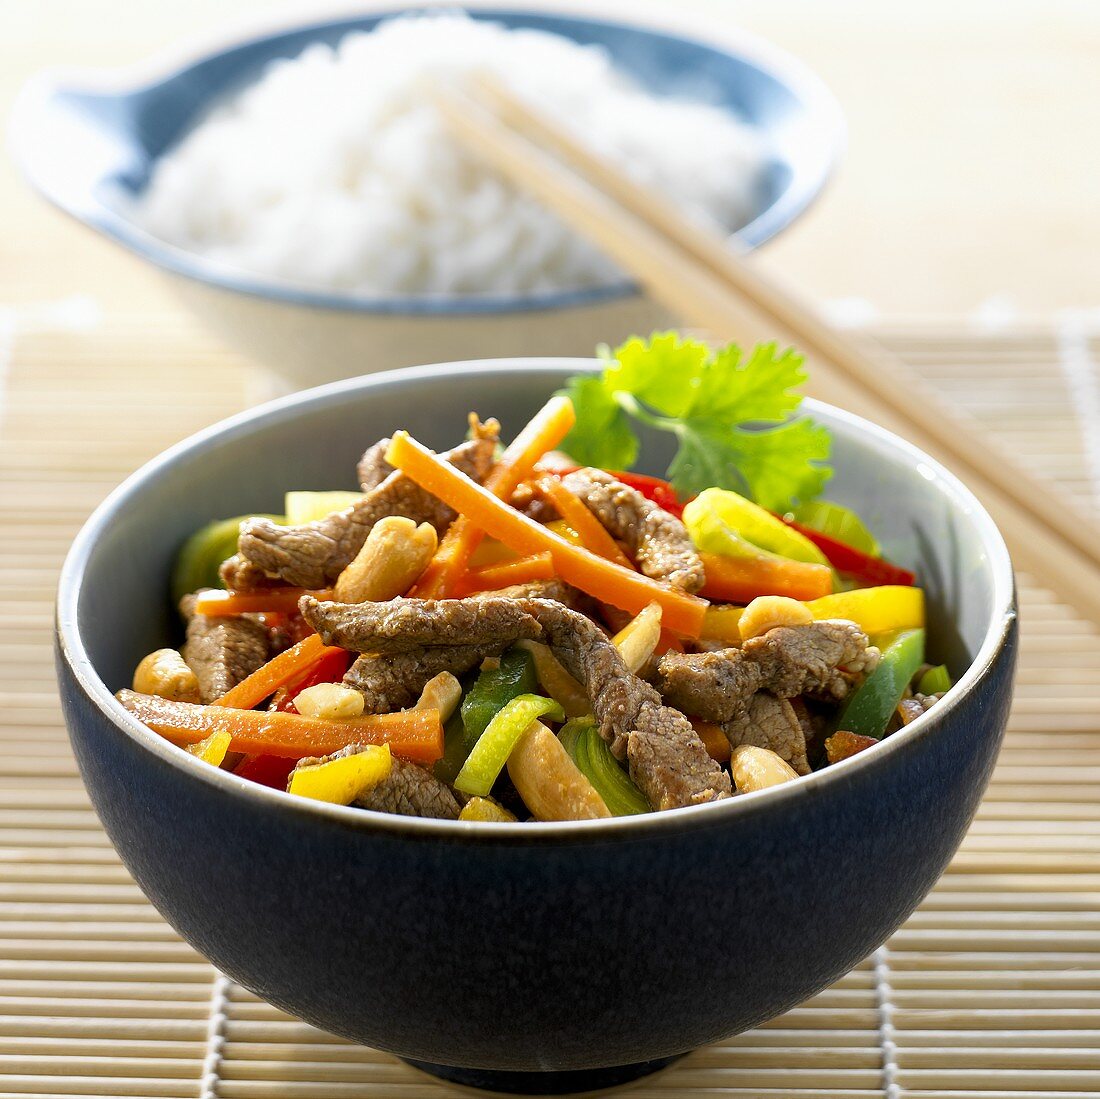 Pork curry with peanuts and vegetables (China)